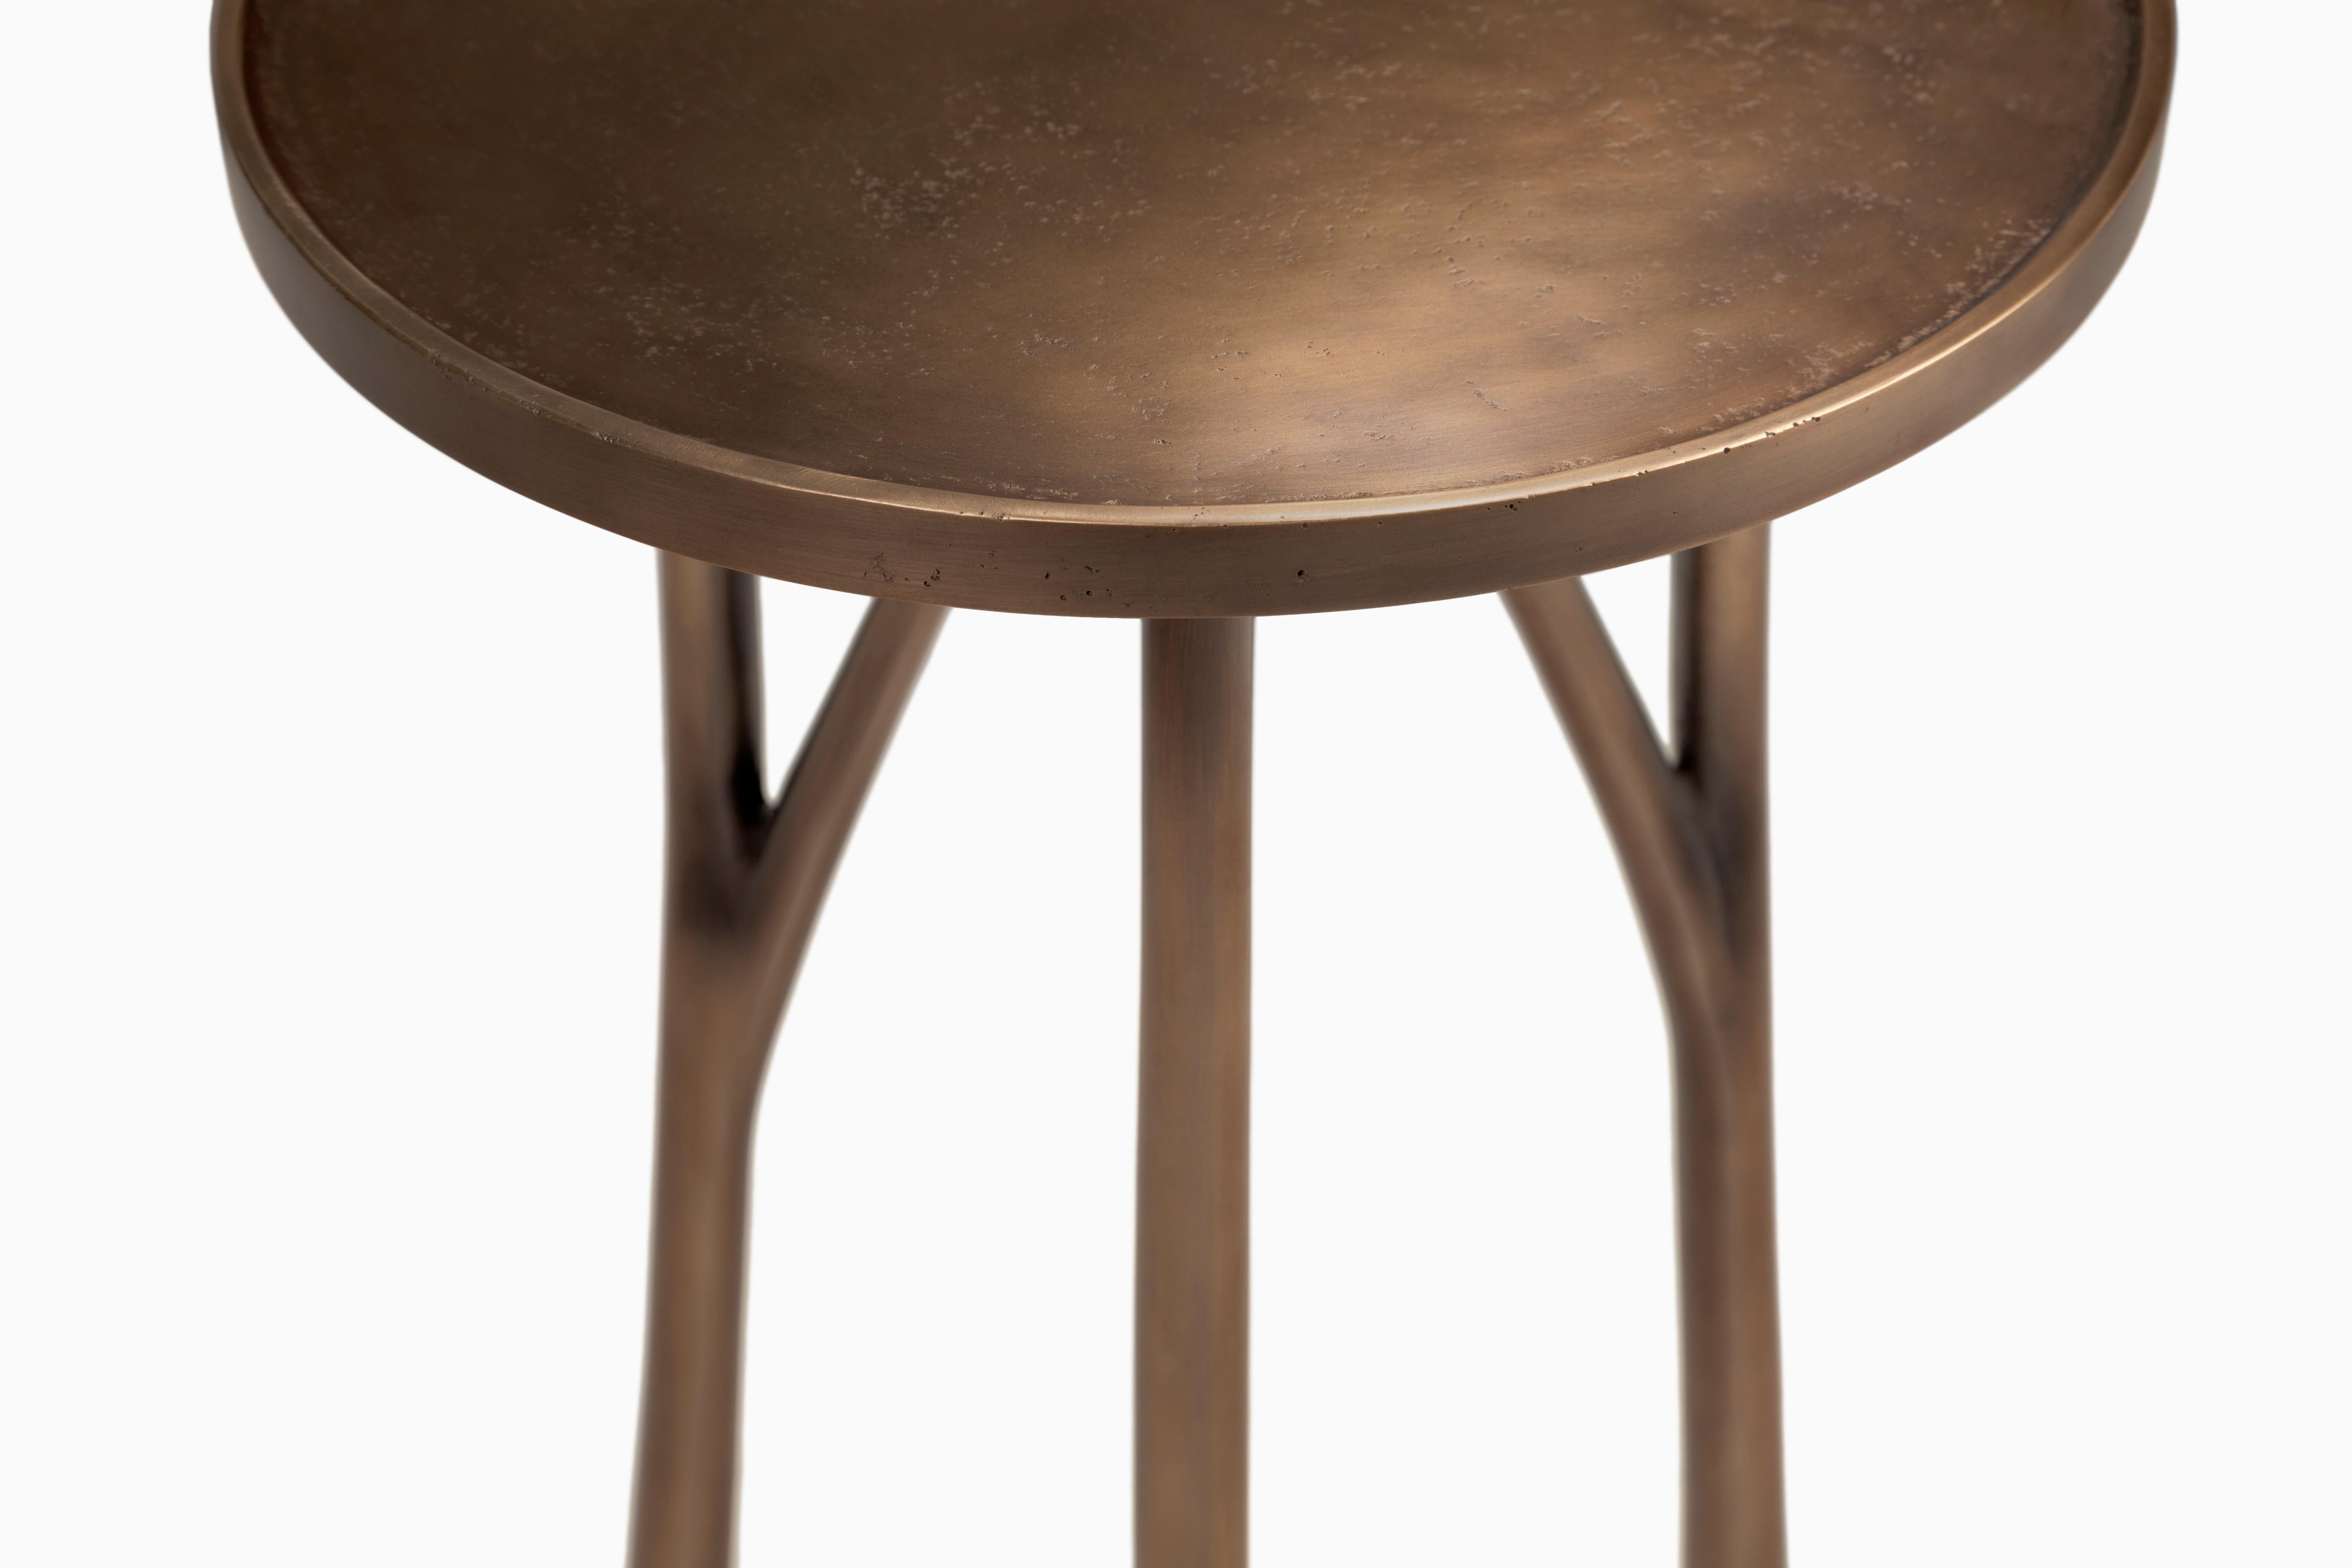 HOLLY HUNT Juniper round table in bronze monument light bronze patina finish. An iconic HOLLY HUNT cast bronze drink table; the perfect perch for your beverage, may it be shaken or stirred.


Additional Information:
Structure: Cast Bronze
Structure